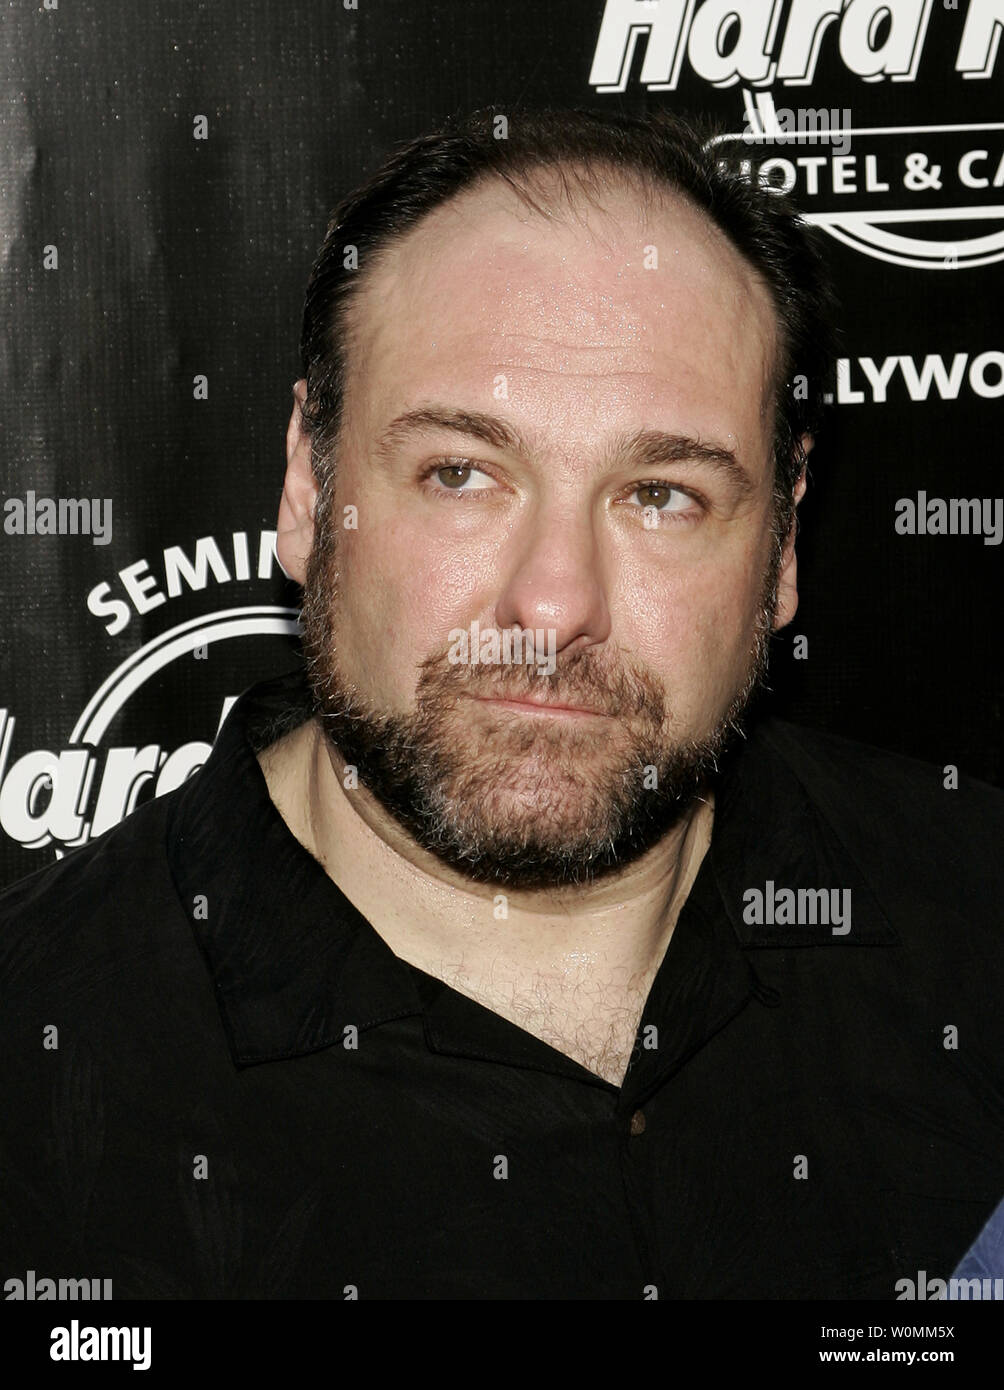 James Gandolfini died of a heart attack at the age of 51 while vacationing with his son  in Rome, Italy on June 20, 2013.  Gandolfini rose to stardom as the Mafia-boss character Tony Soprano.  He is shown in a 2007 file photo in Florida.  UPI/Michael Bush/Files Stock Photo